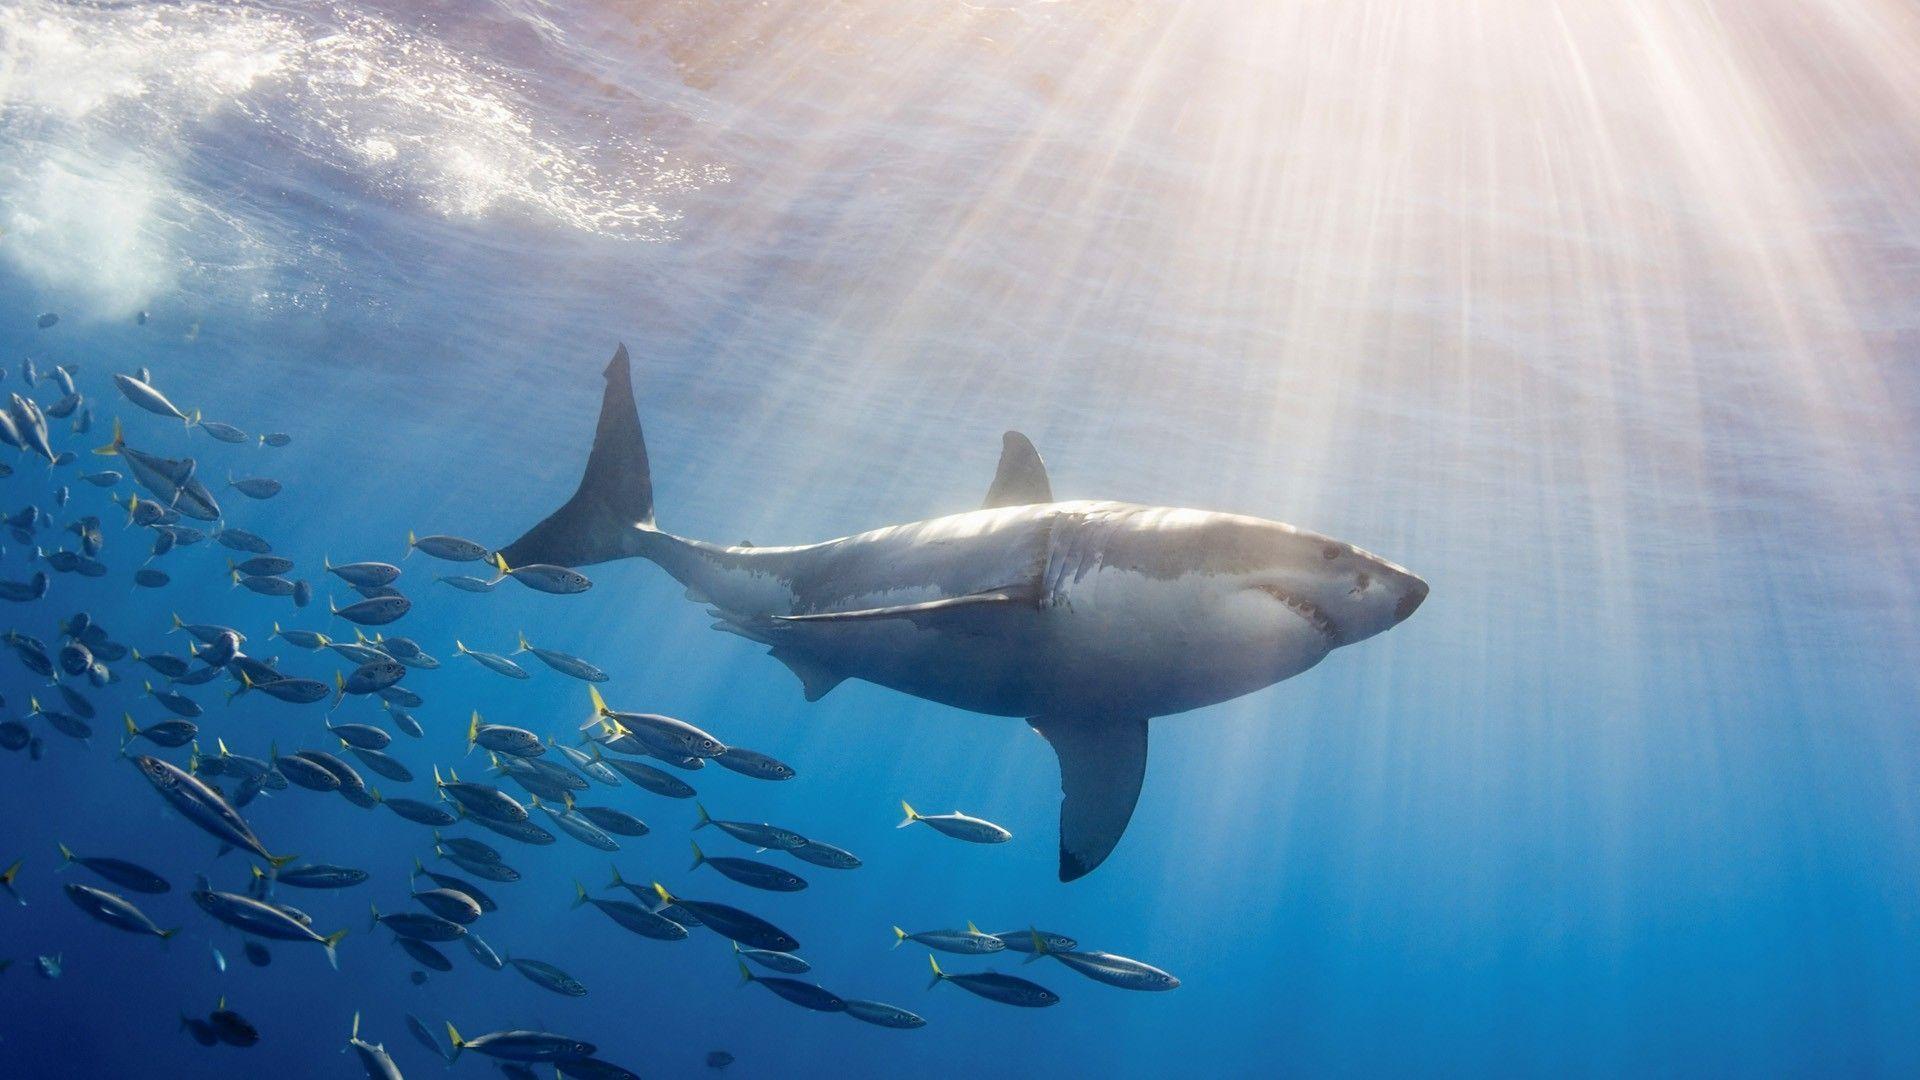 200 Shark HD Wallpapers and Backgrounds